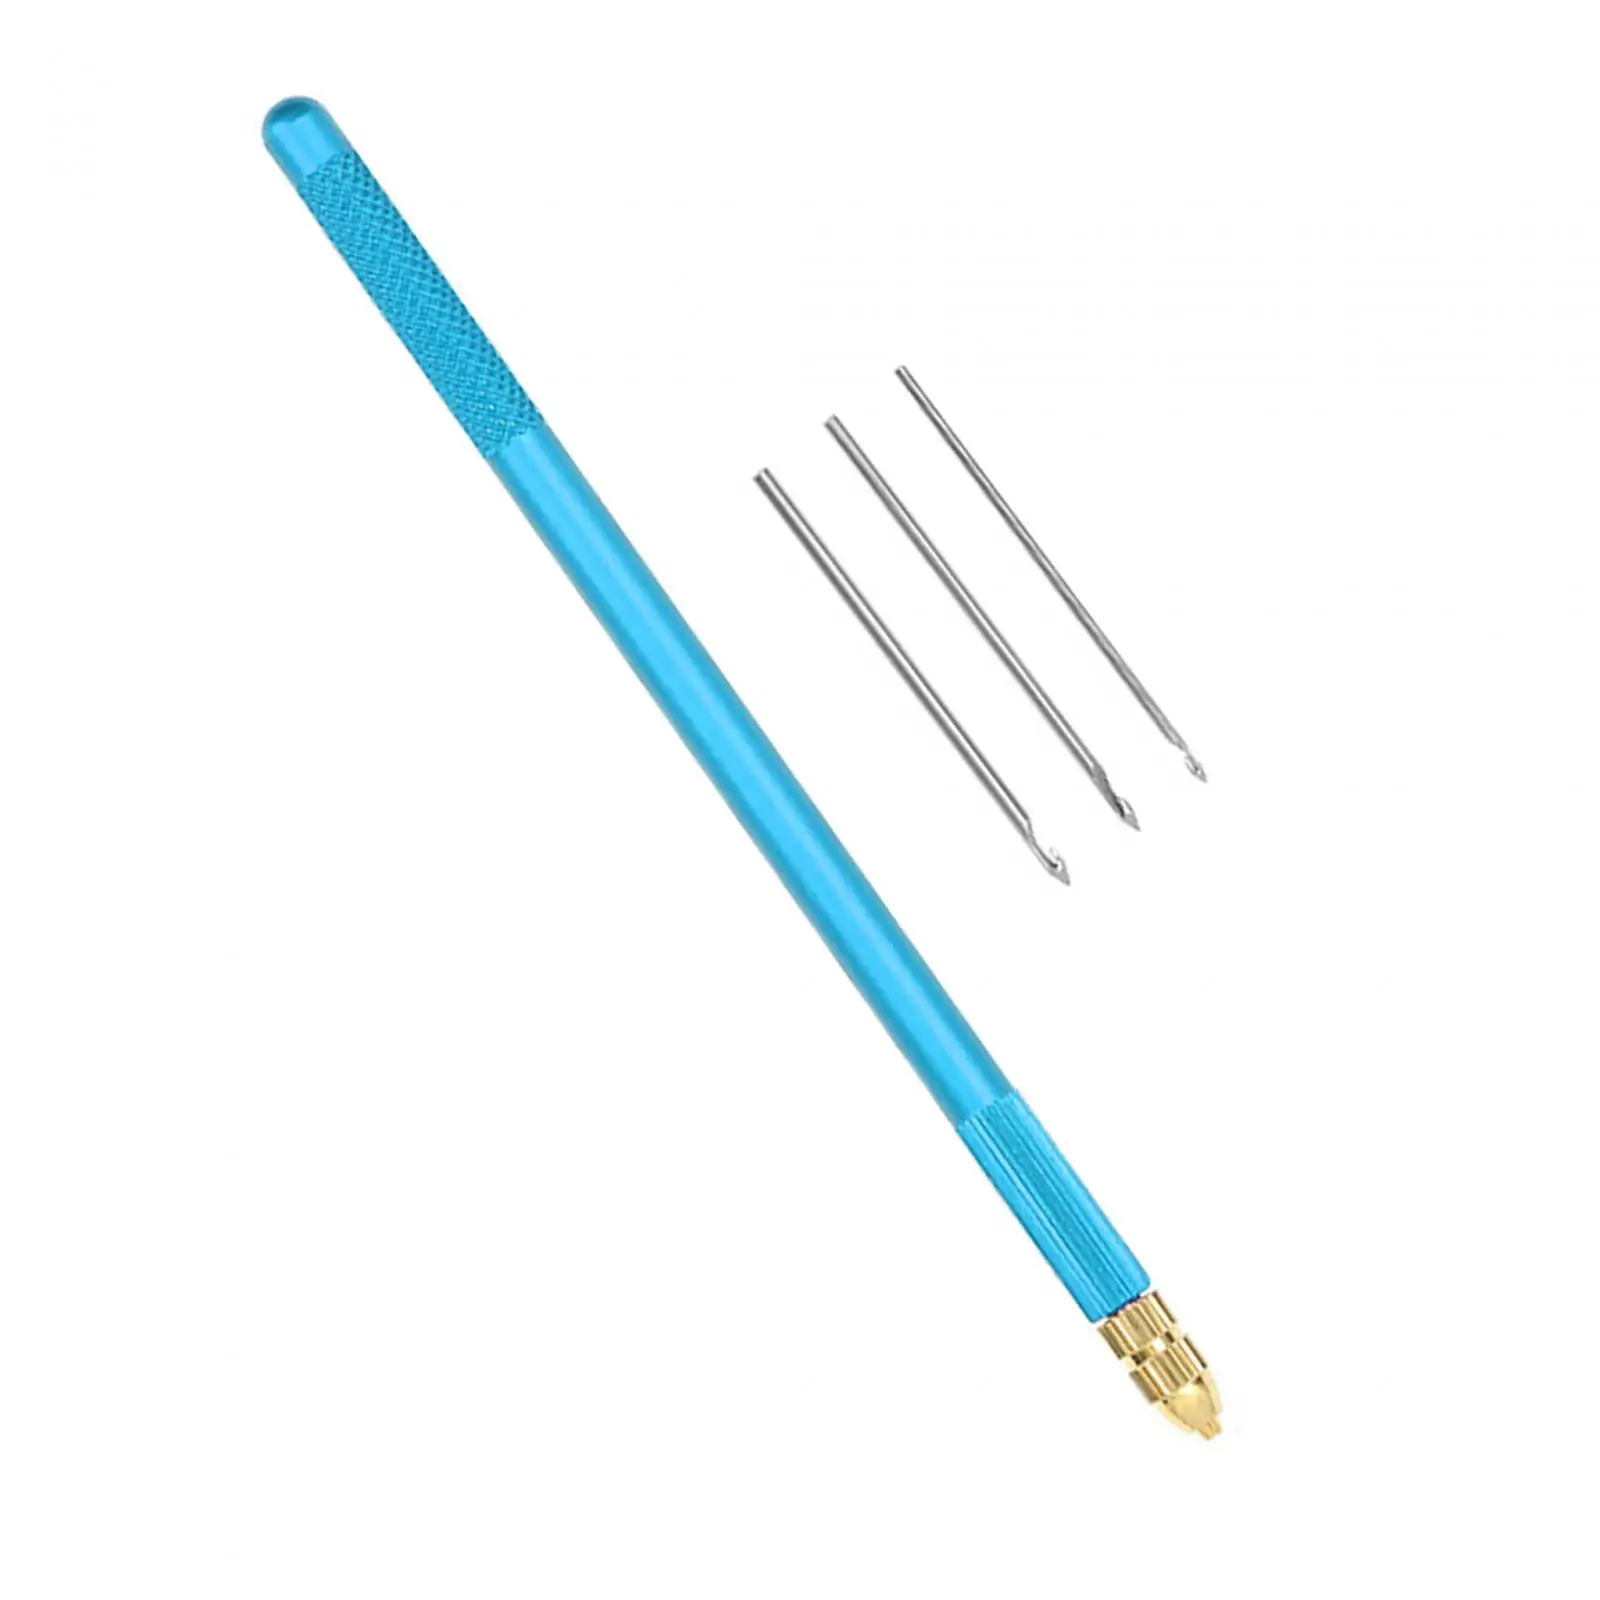 Tambour Crochet Hook with 3 Needles 0.7mm/1.0mm/1.2mm Embroidery Needle Set for Sewing Embroidering DIY Craft Punching Beginner